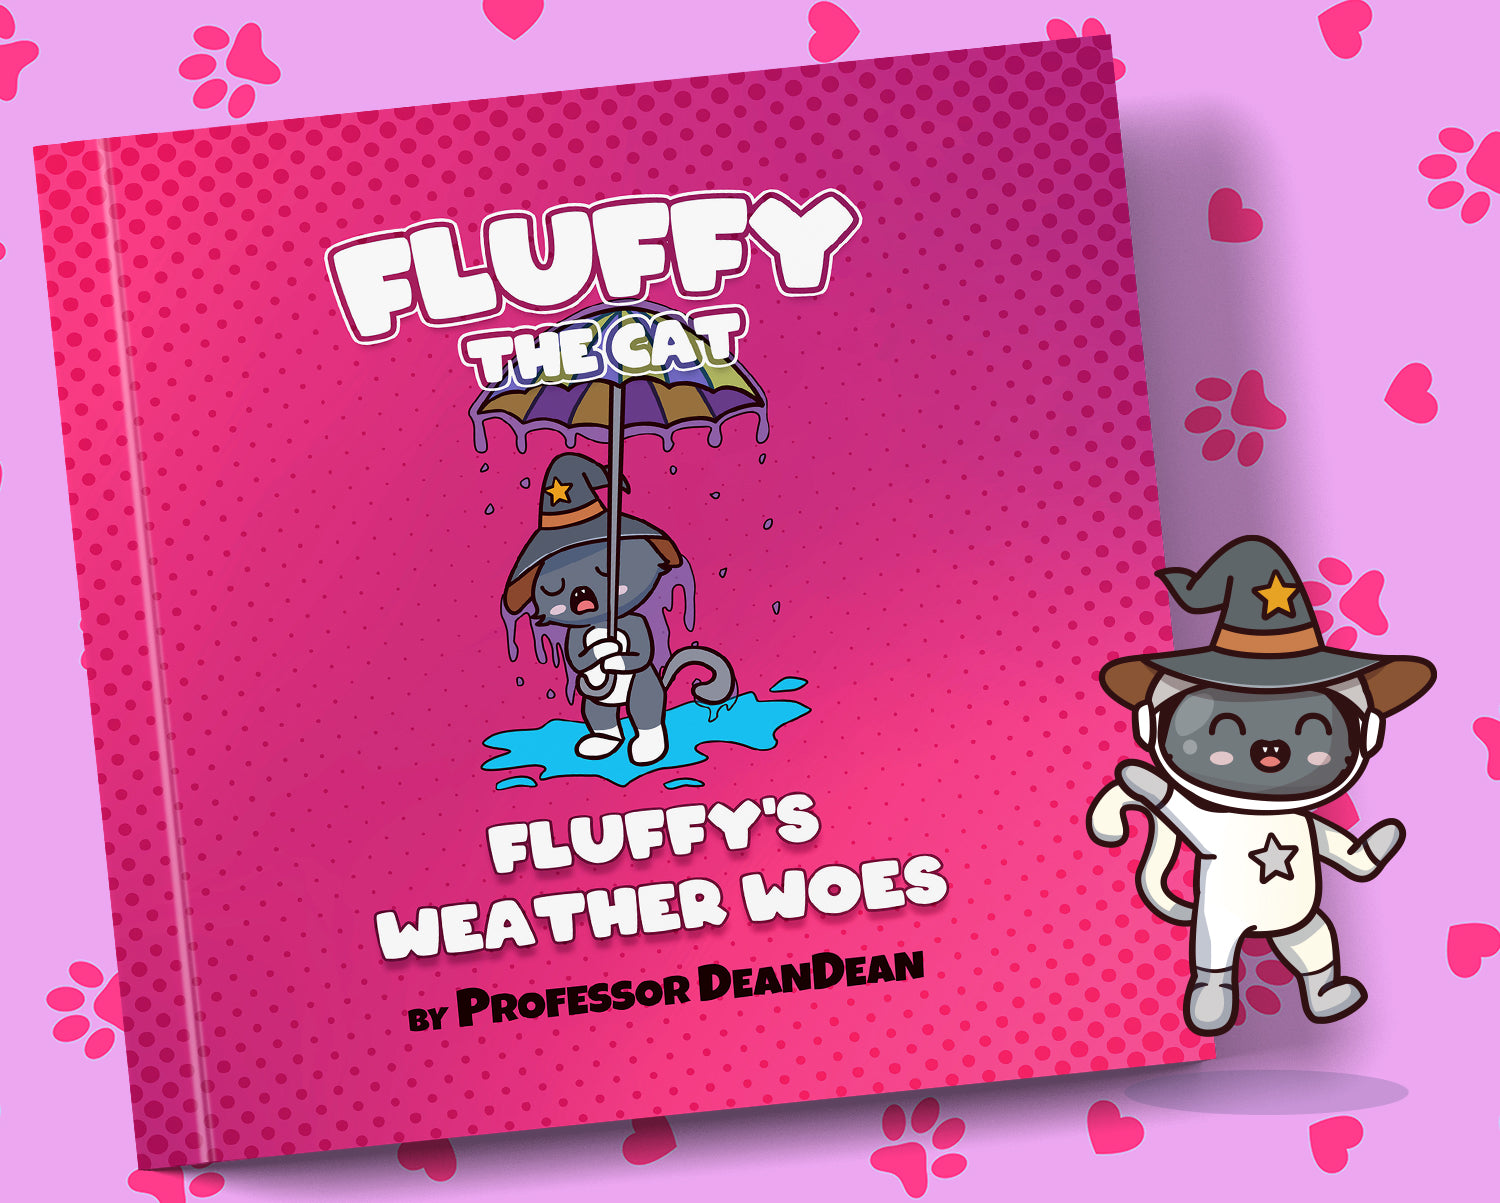 Fluffy’s Weather Woes